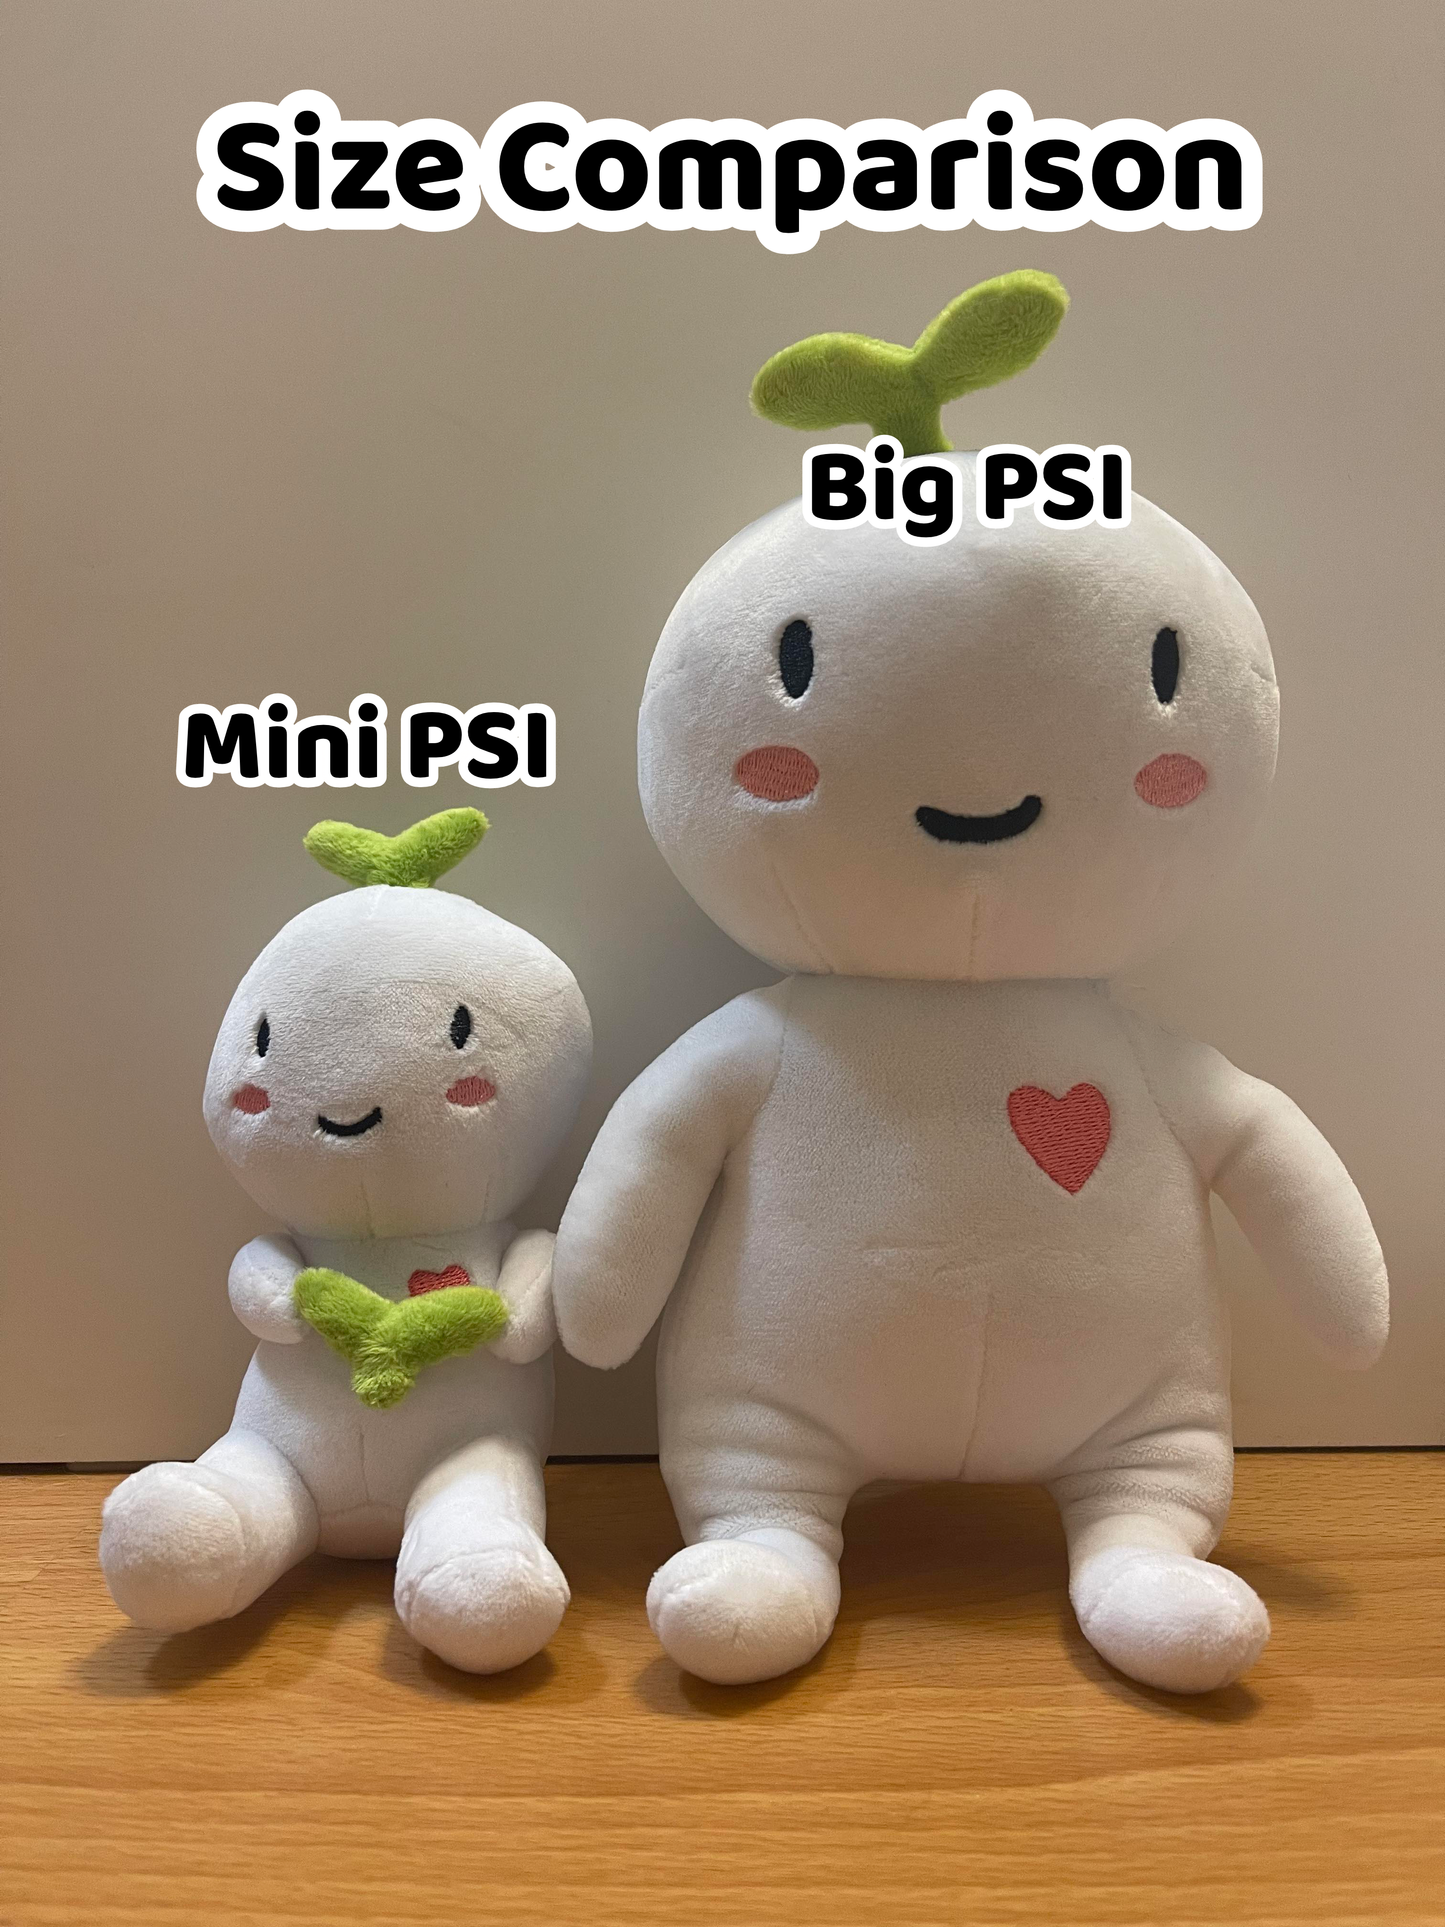 Your Emotional Support Plush PSI FROM PSYCH2GO (BIG PSI)